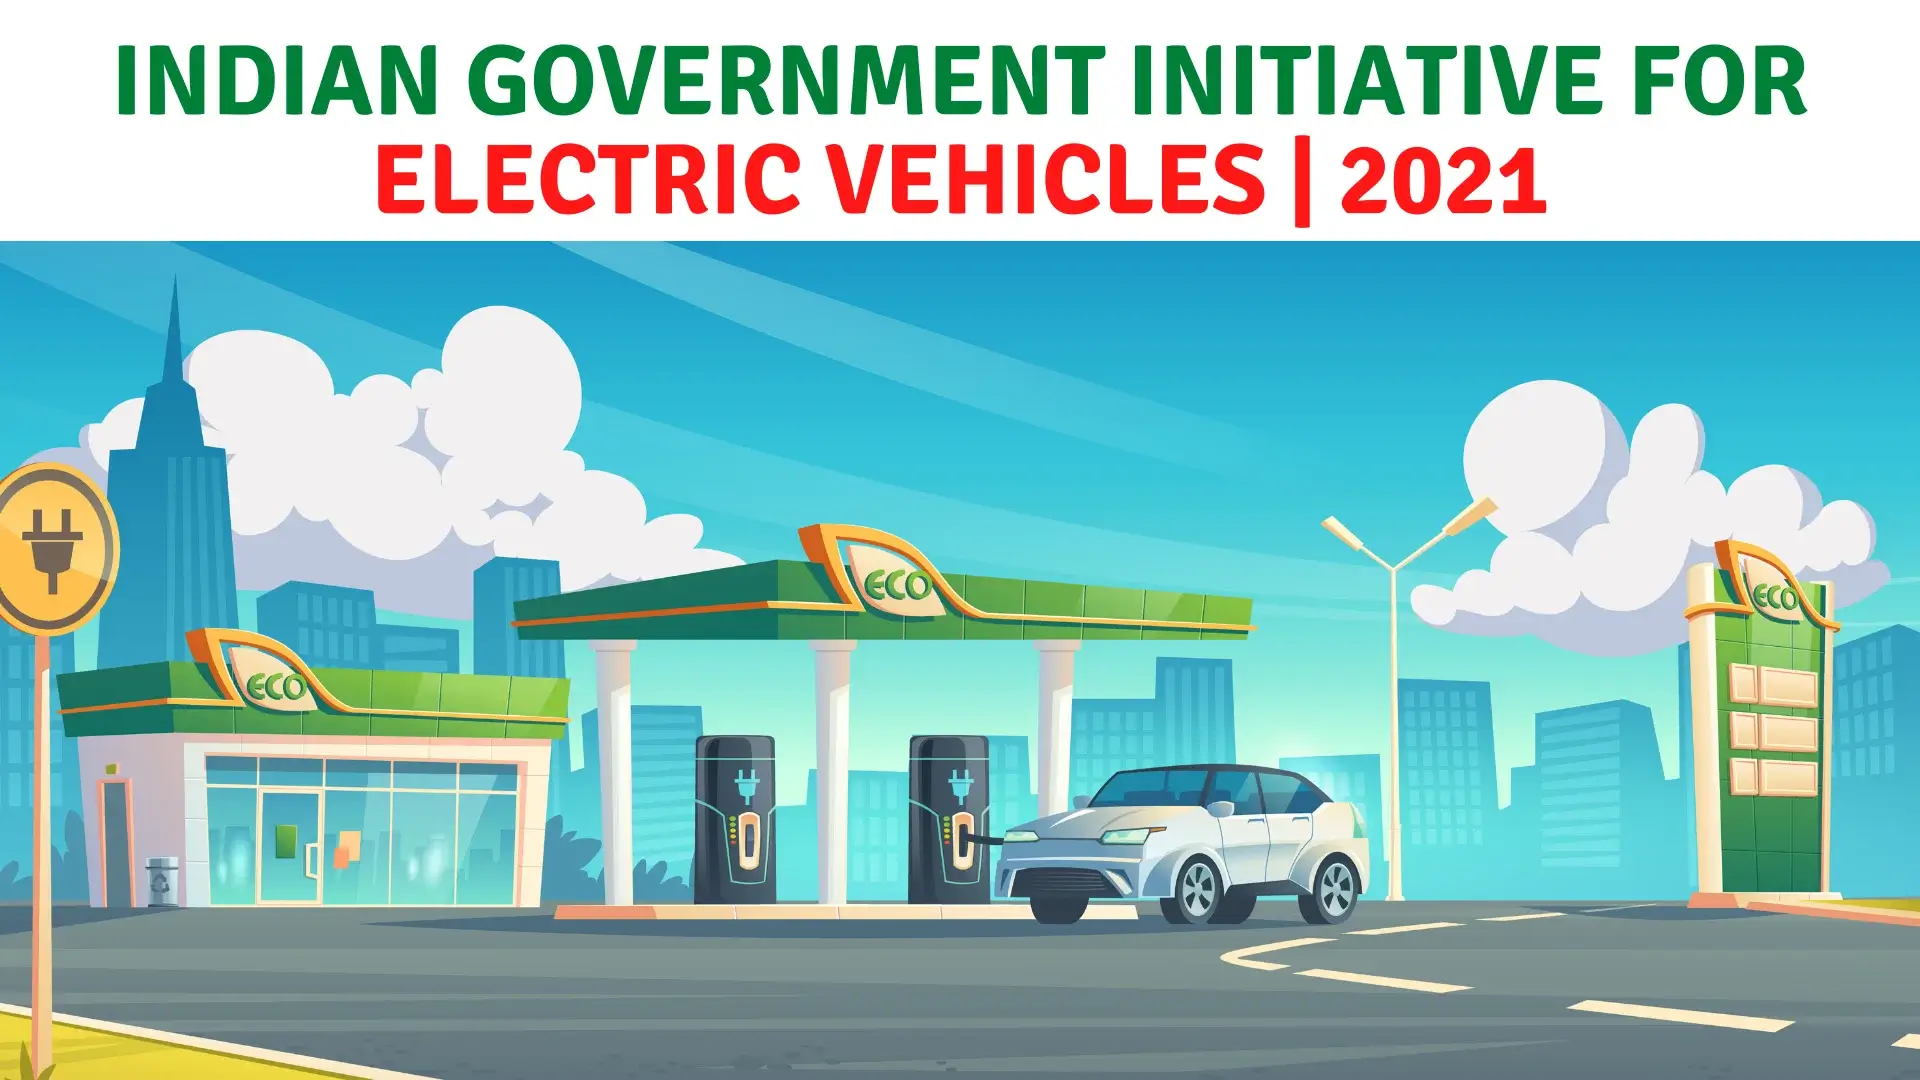 https://e-vehicleinfo.com/indian-government-initiatives-to-promote-electric-vehicles/